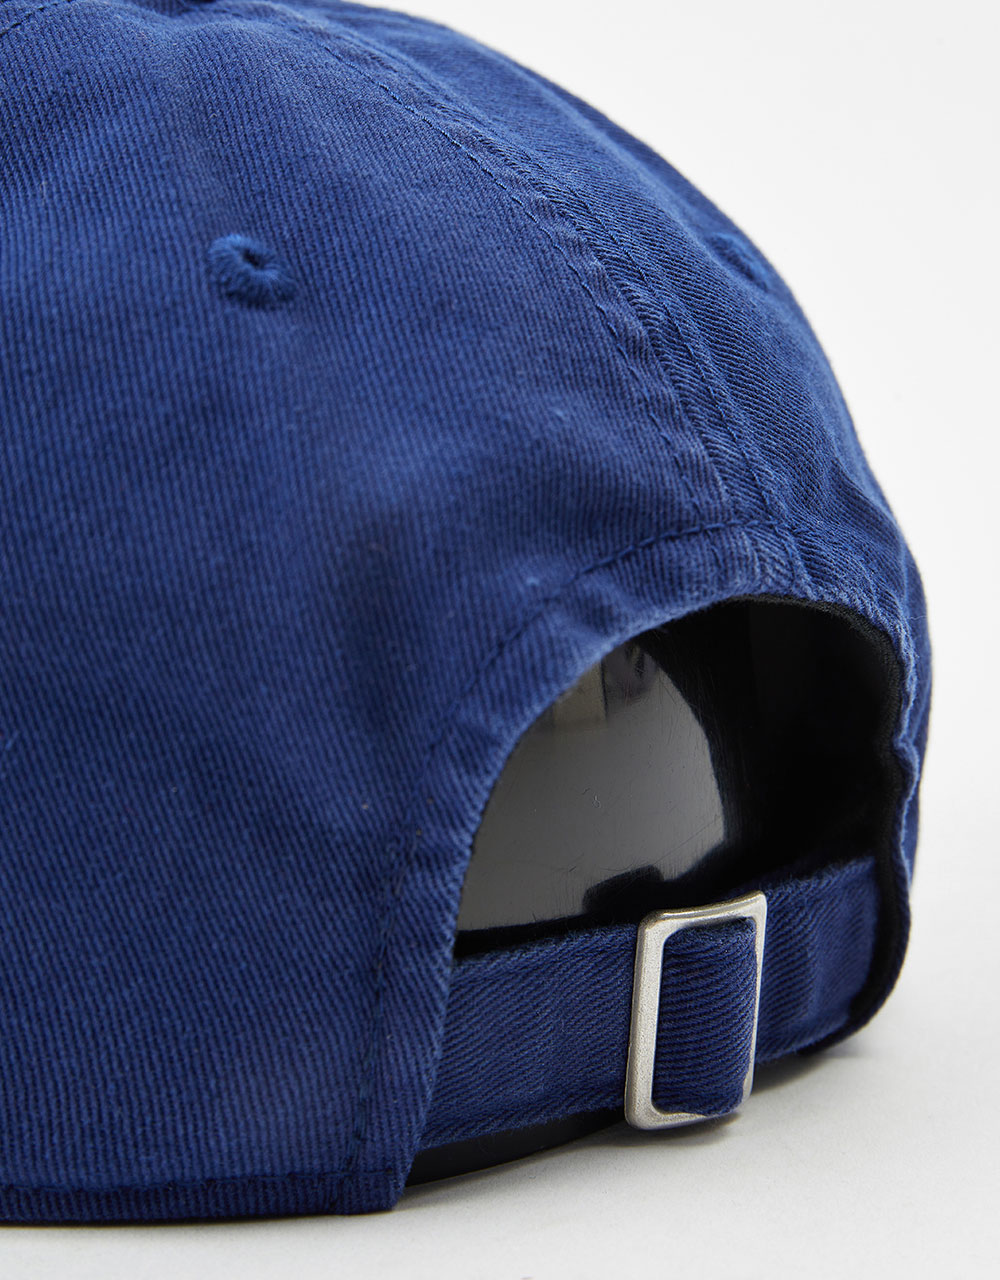 Route One Dad Cap - Navy